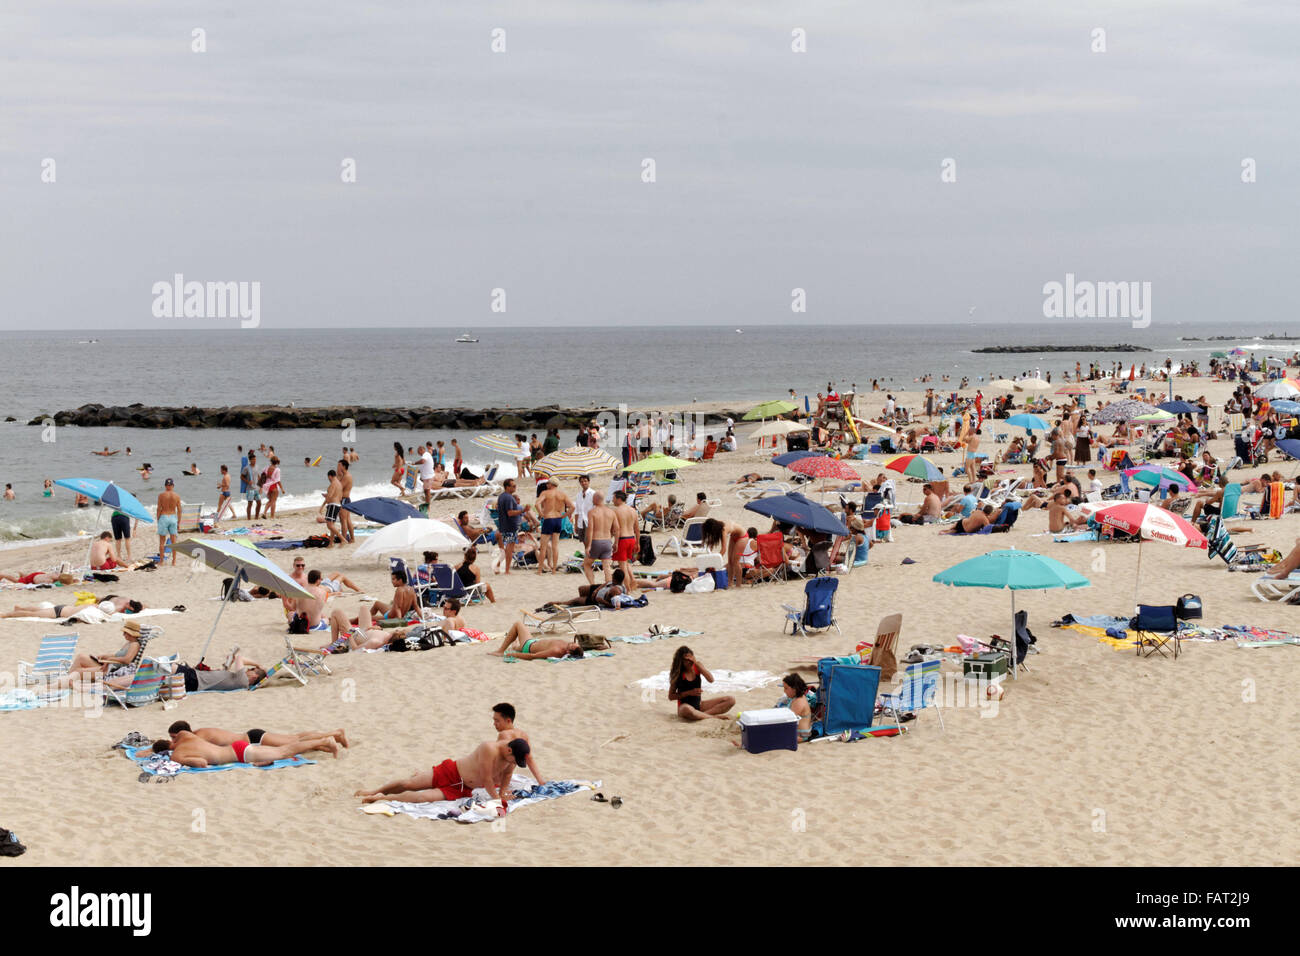 Beach and boardwalk scenes in Asbury Park on the New Jersey shore. Stock Photo